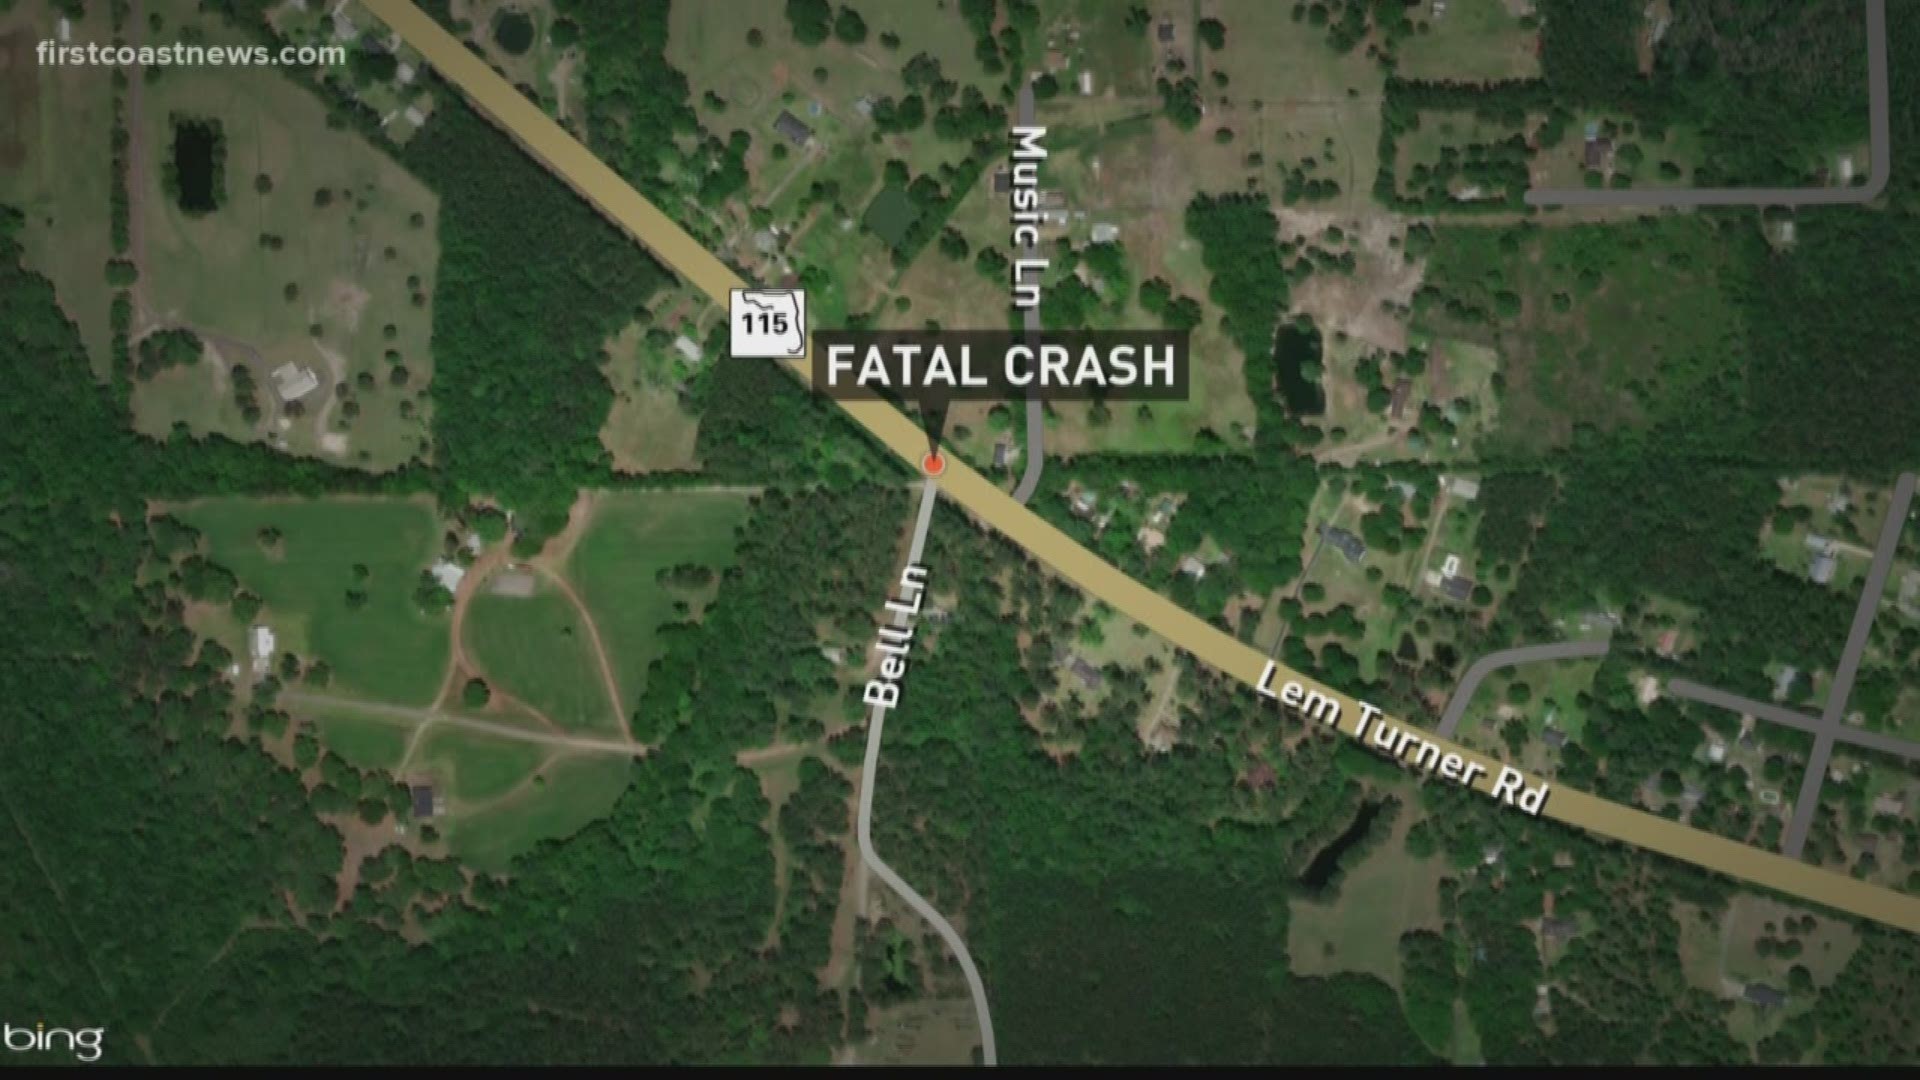 A Callahan woman died following a head-on collision along State Road 115 in Nassau County Friday night.